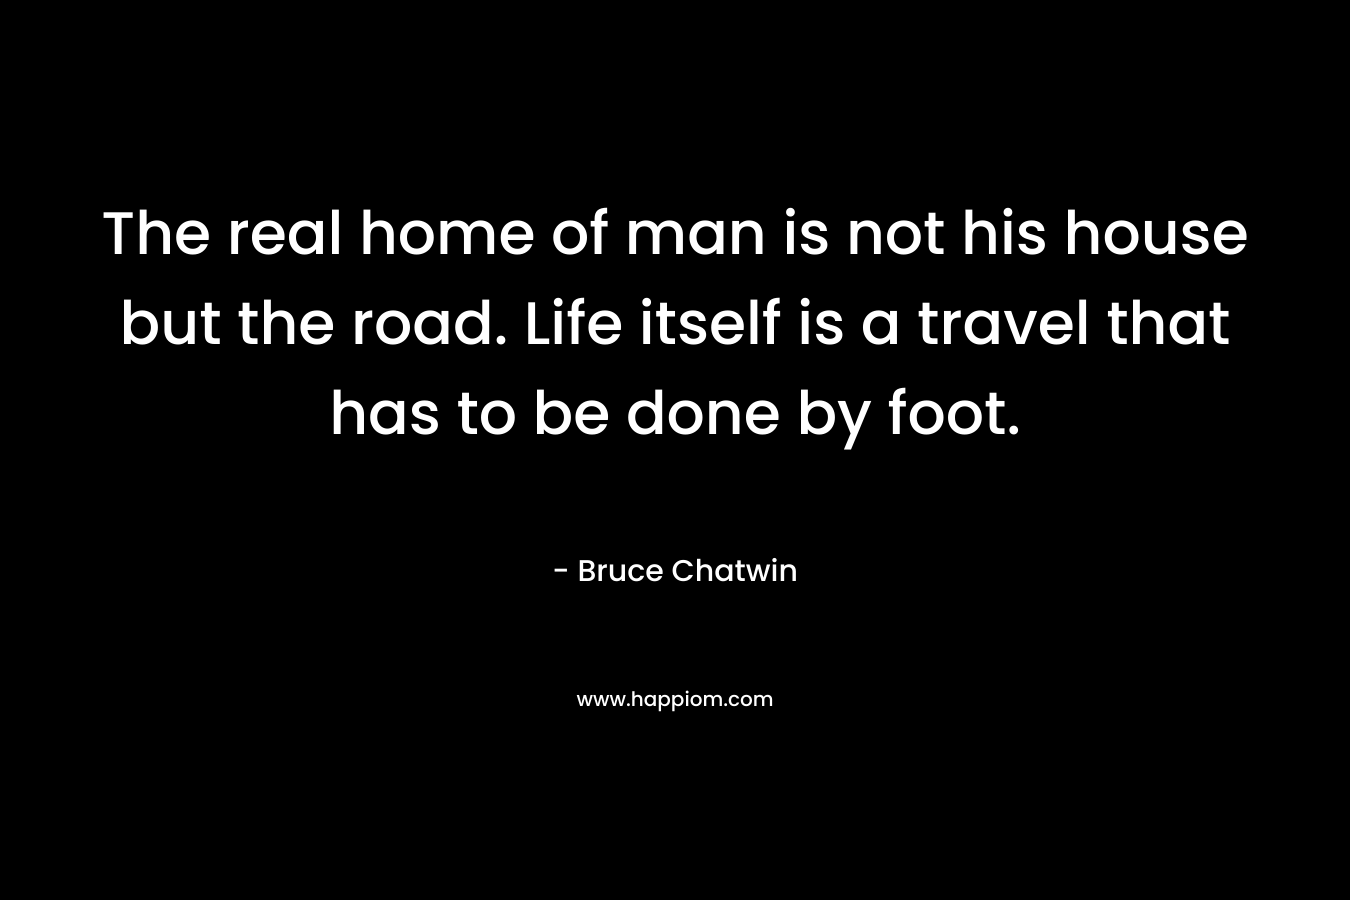 The real home of man is not his house but the road. Life itself is a travel that has to be done by foot. – Bruce Chatwin